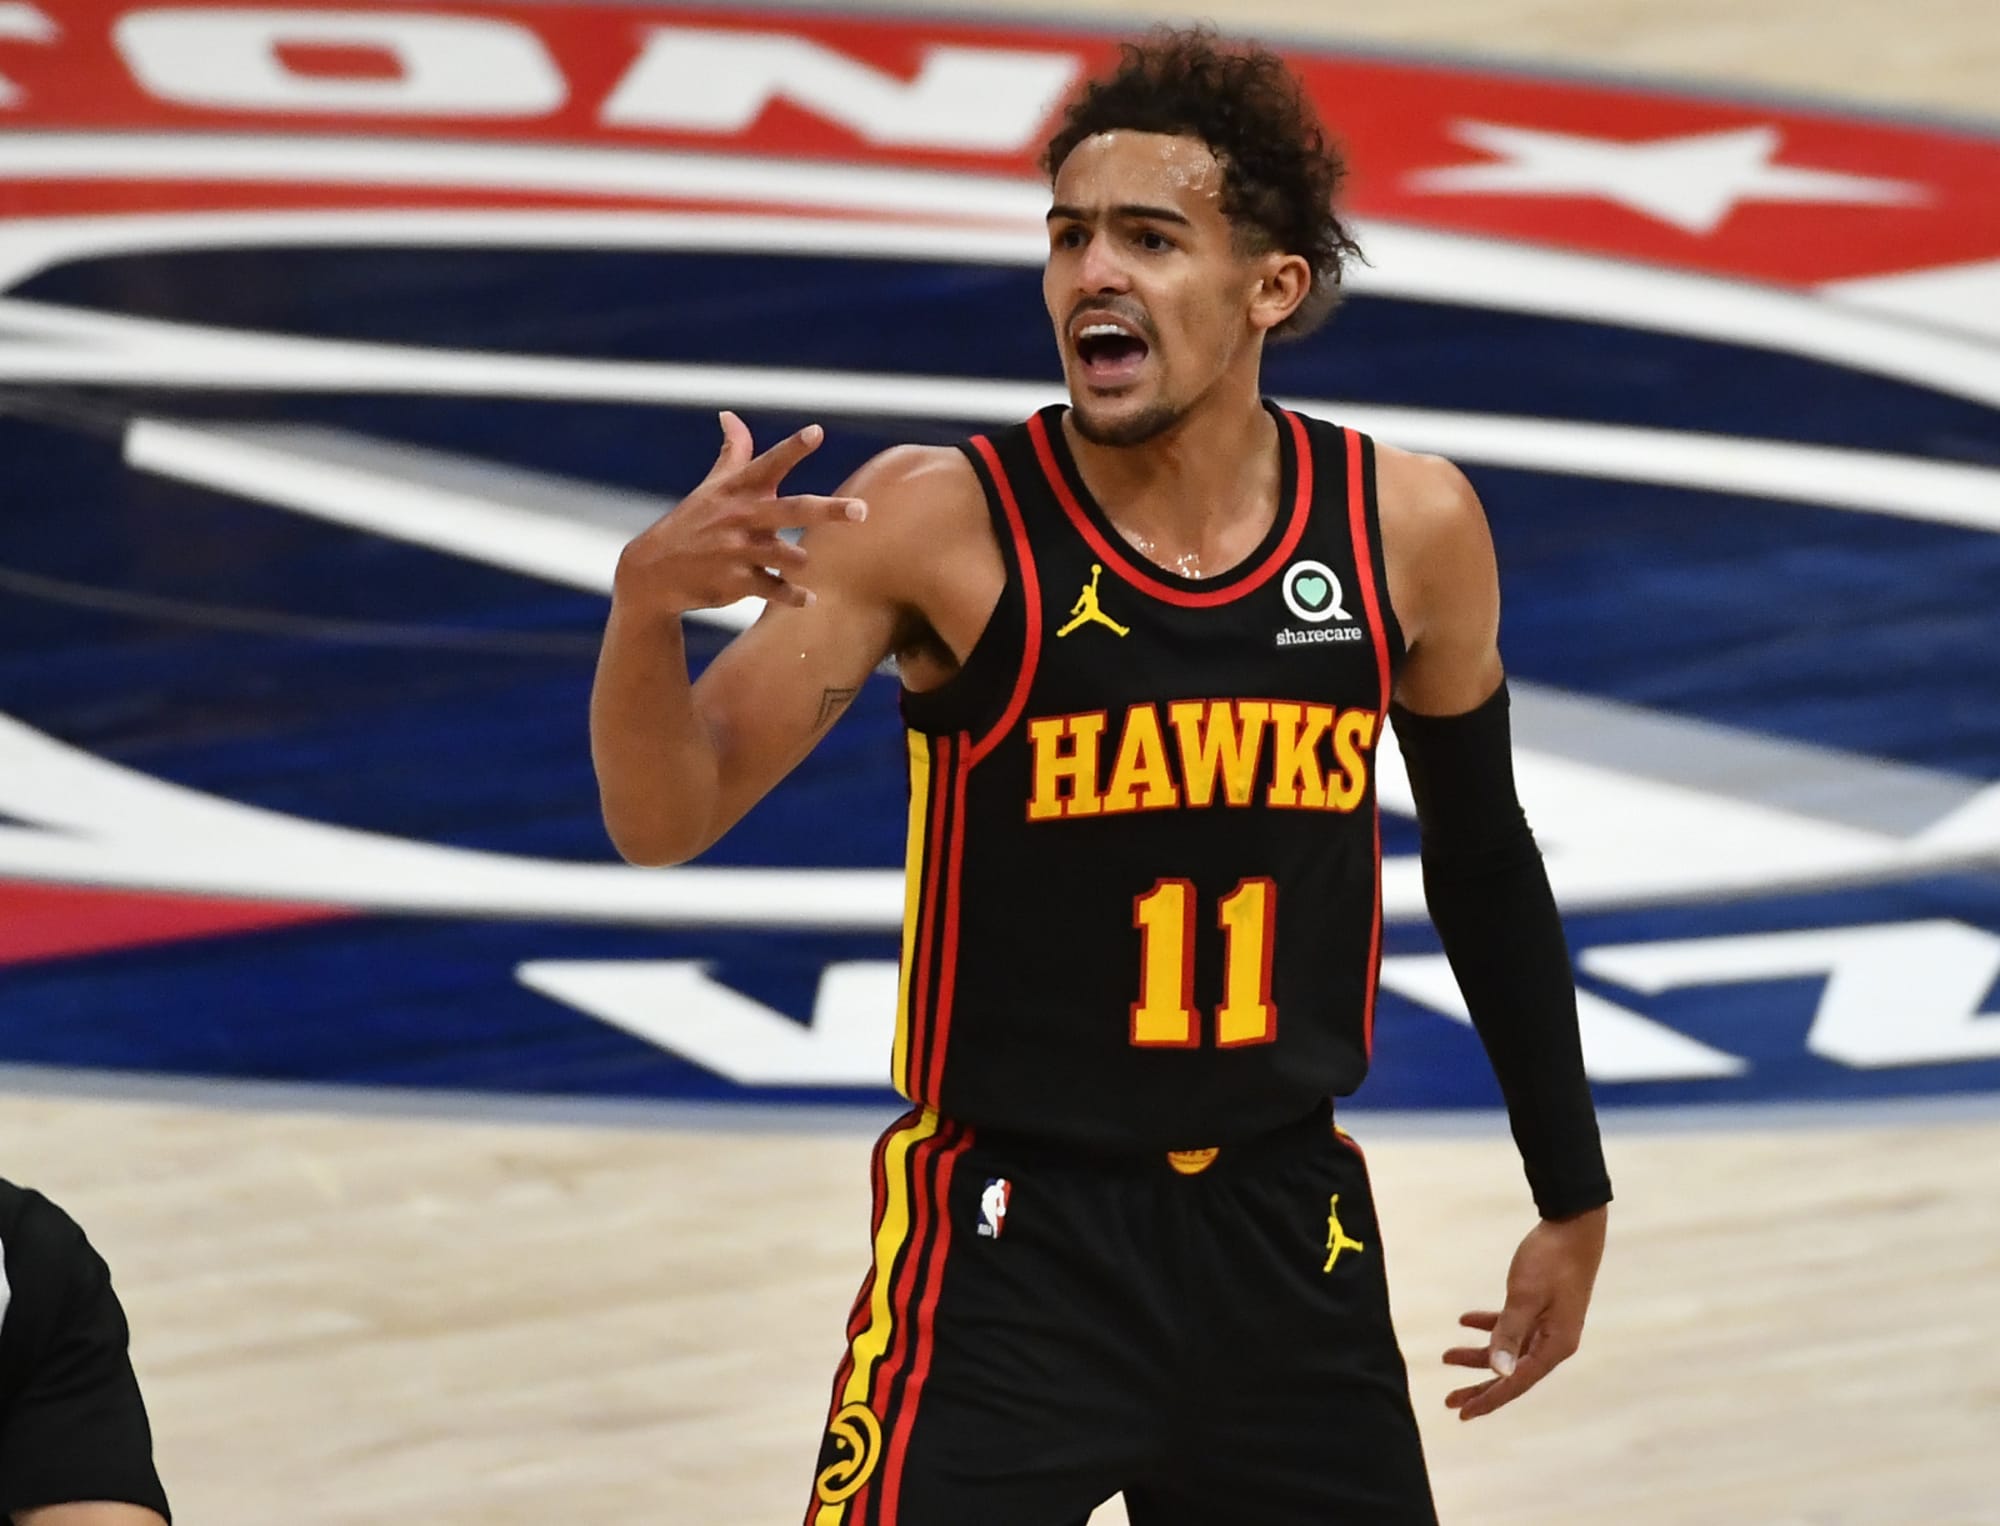 Why Atlanta Hawks star Trae Young was not named an All-Star